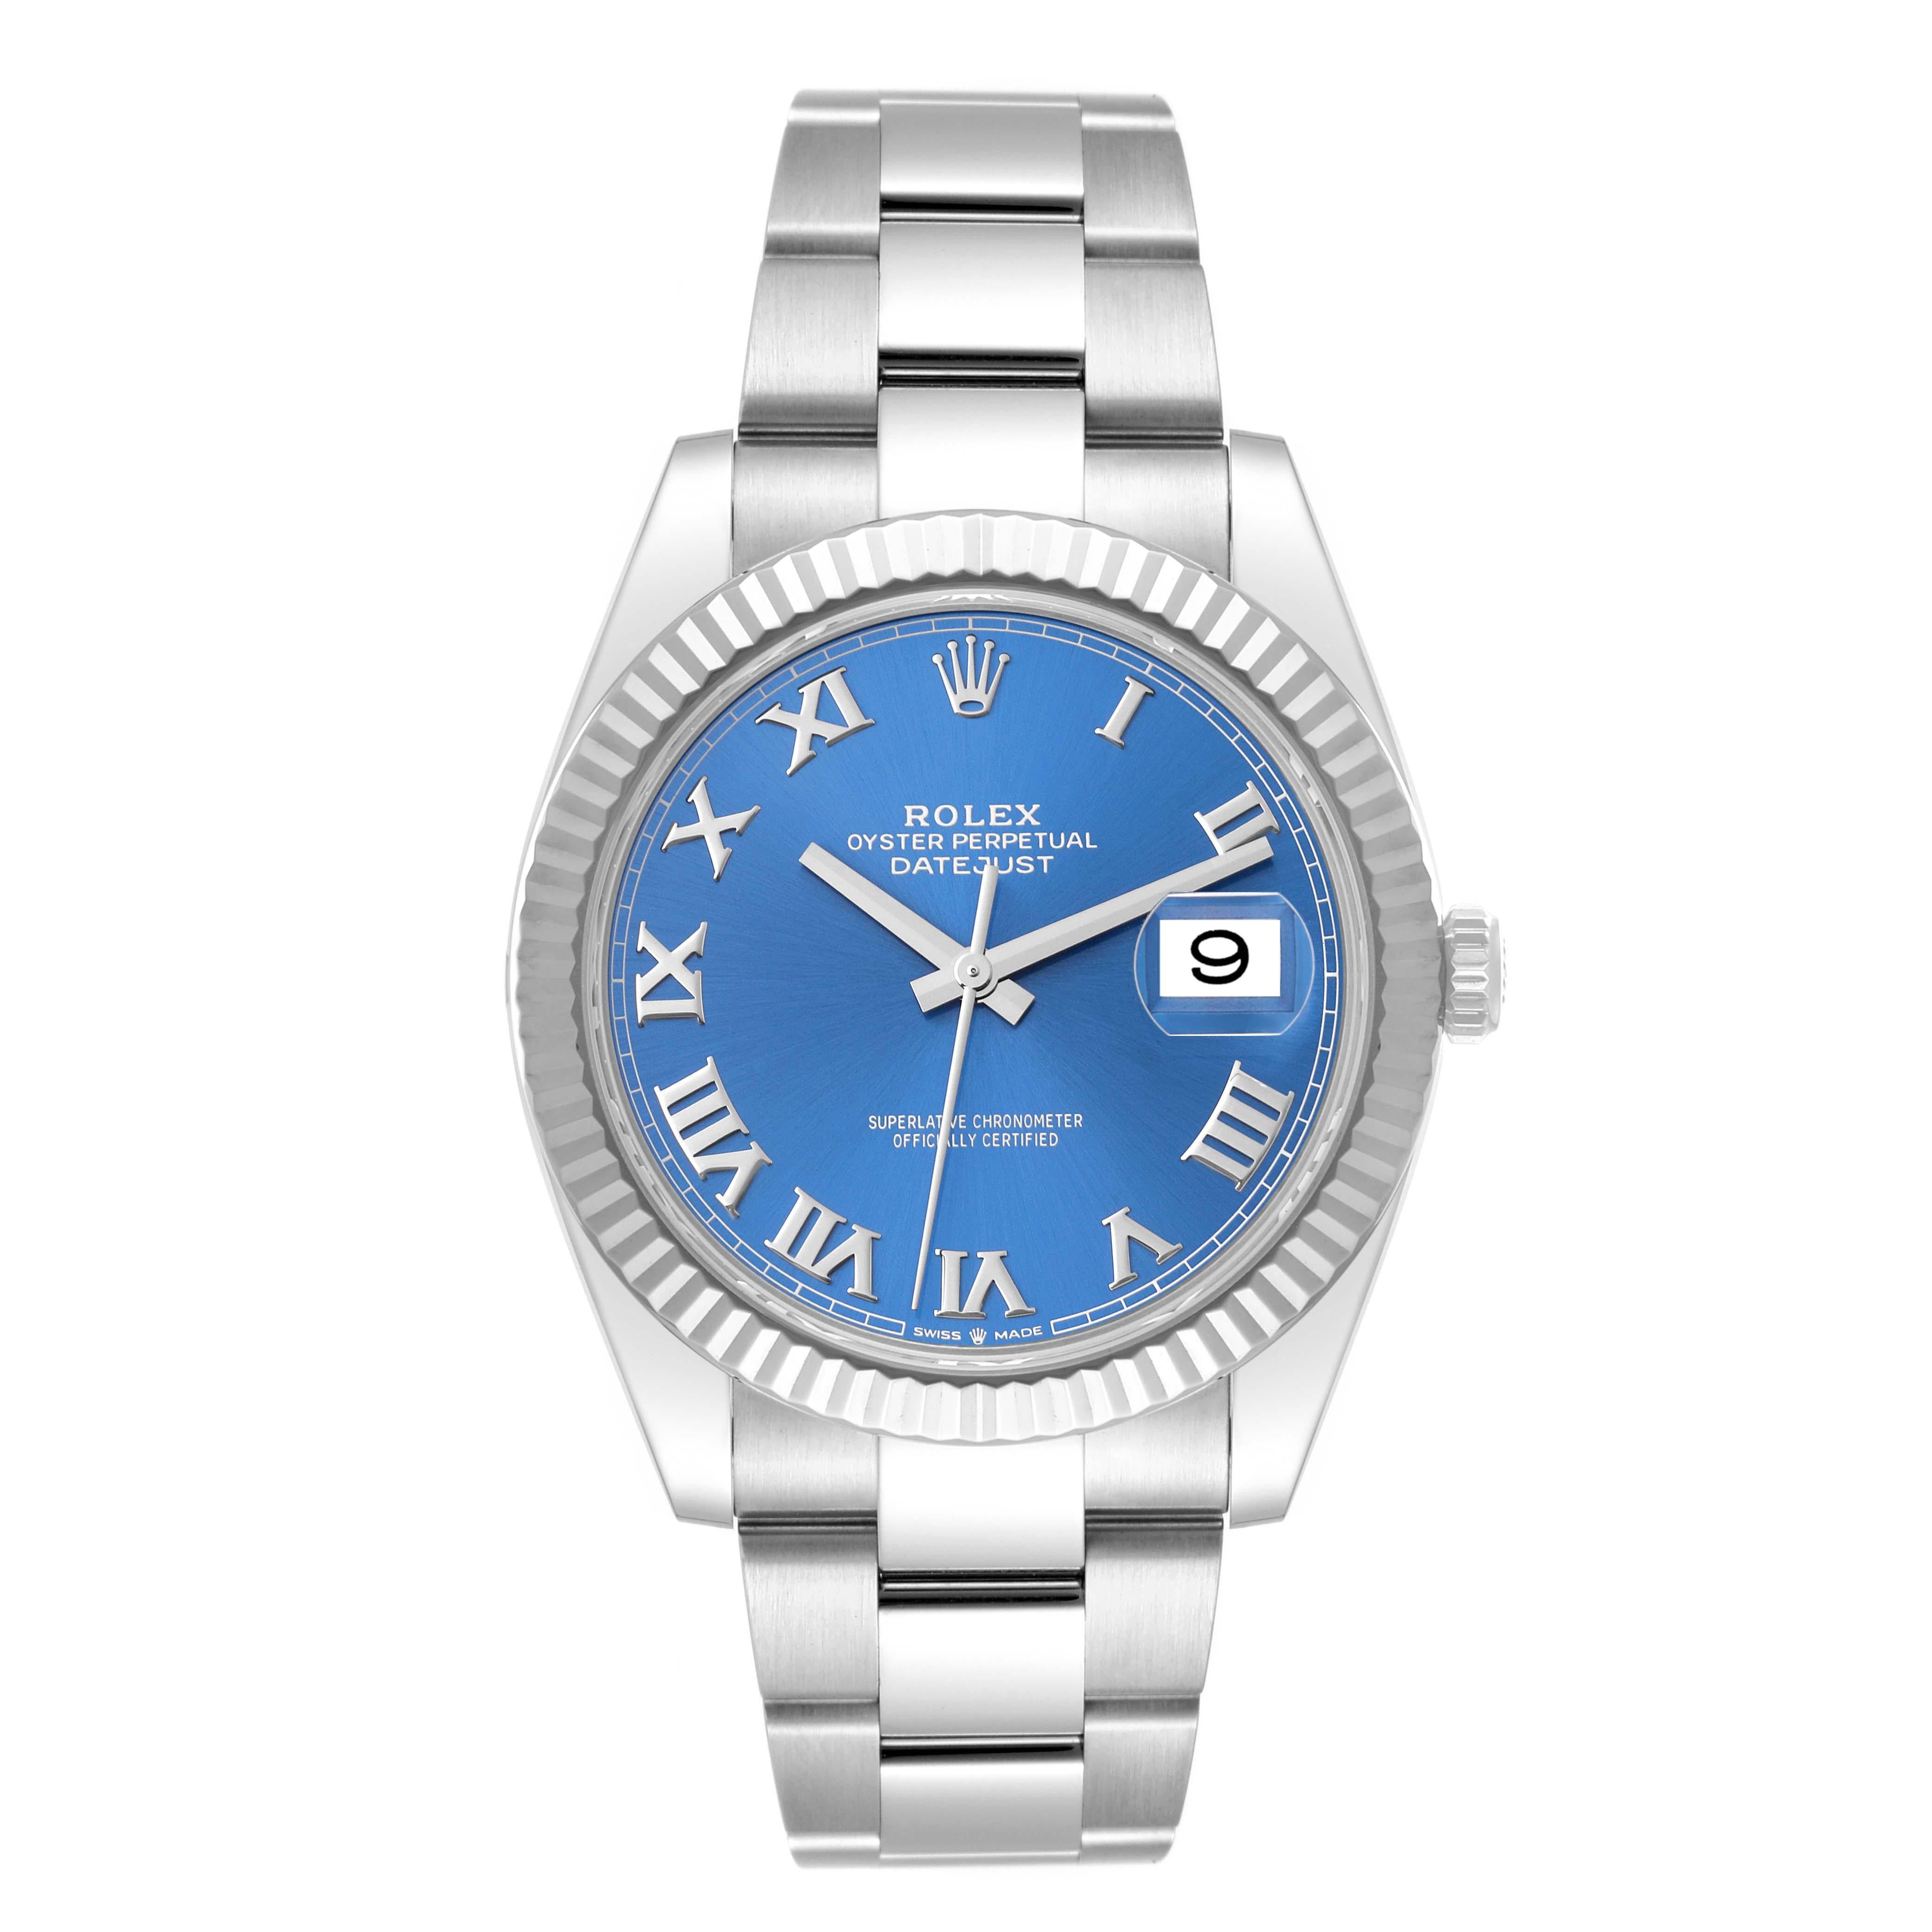 Rolex Datejust 41 Steel White Gold Blue Roman Dial Mens Watch 126334 Box Card. Officially certified chronometer automatic self-winding movement. Stainless steel case 41 mm in diameter. Rolex logo on the crown. 18K white gold fluted bezel. Scratch